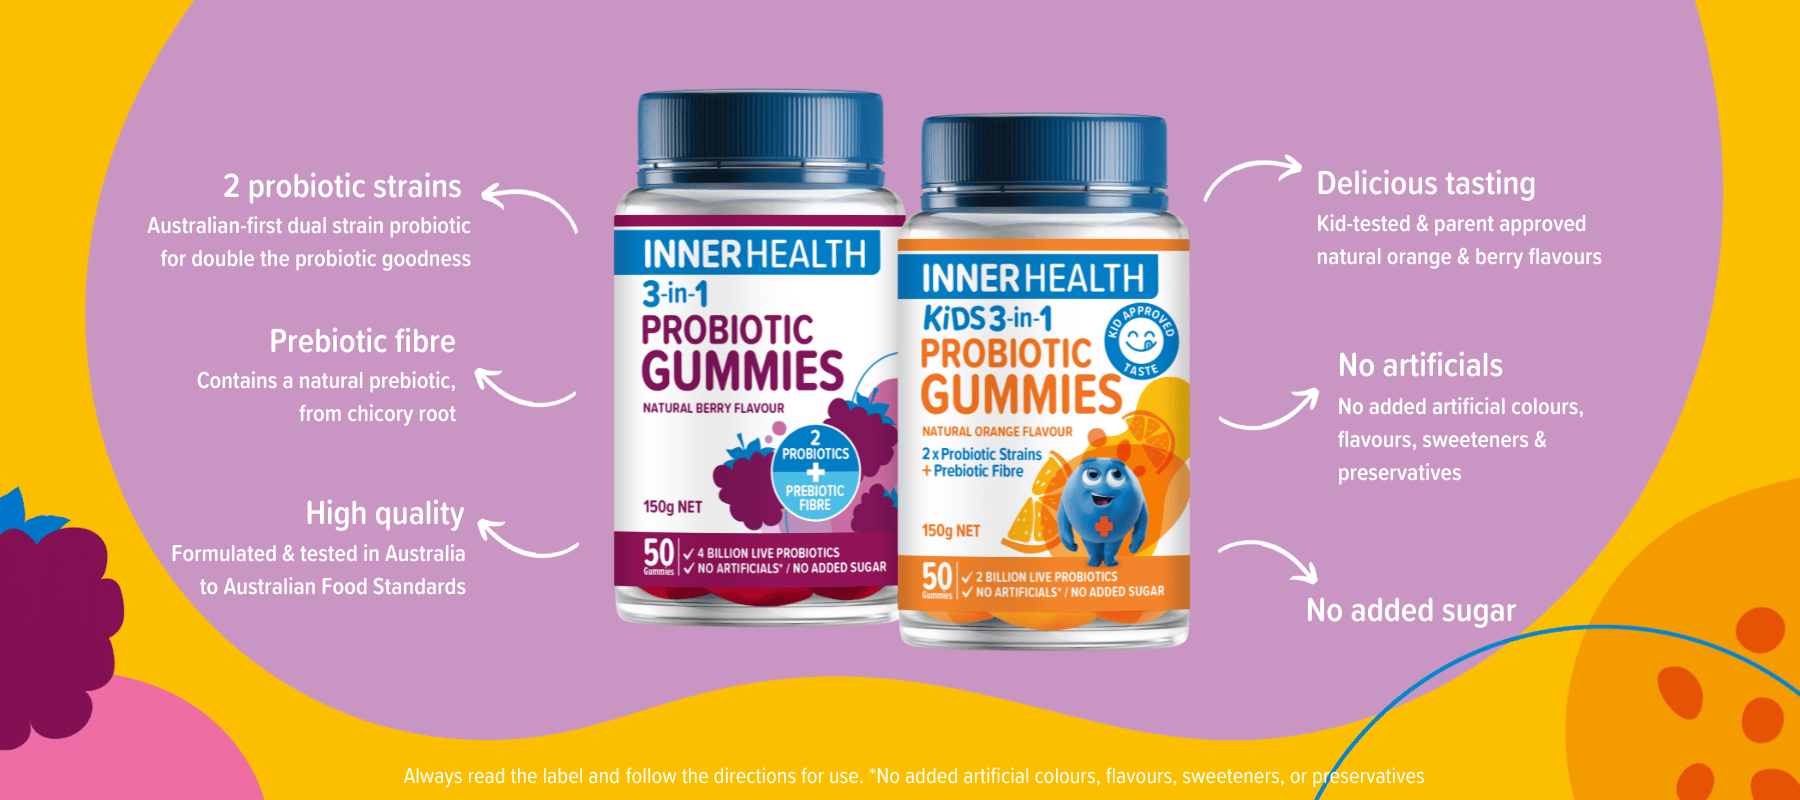 Infographic of Inner Health probiotic gummies showing key features.